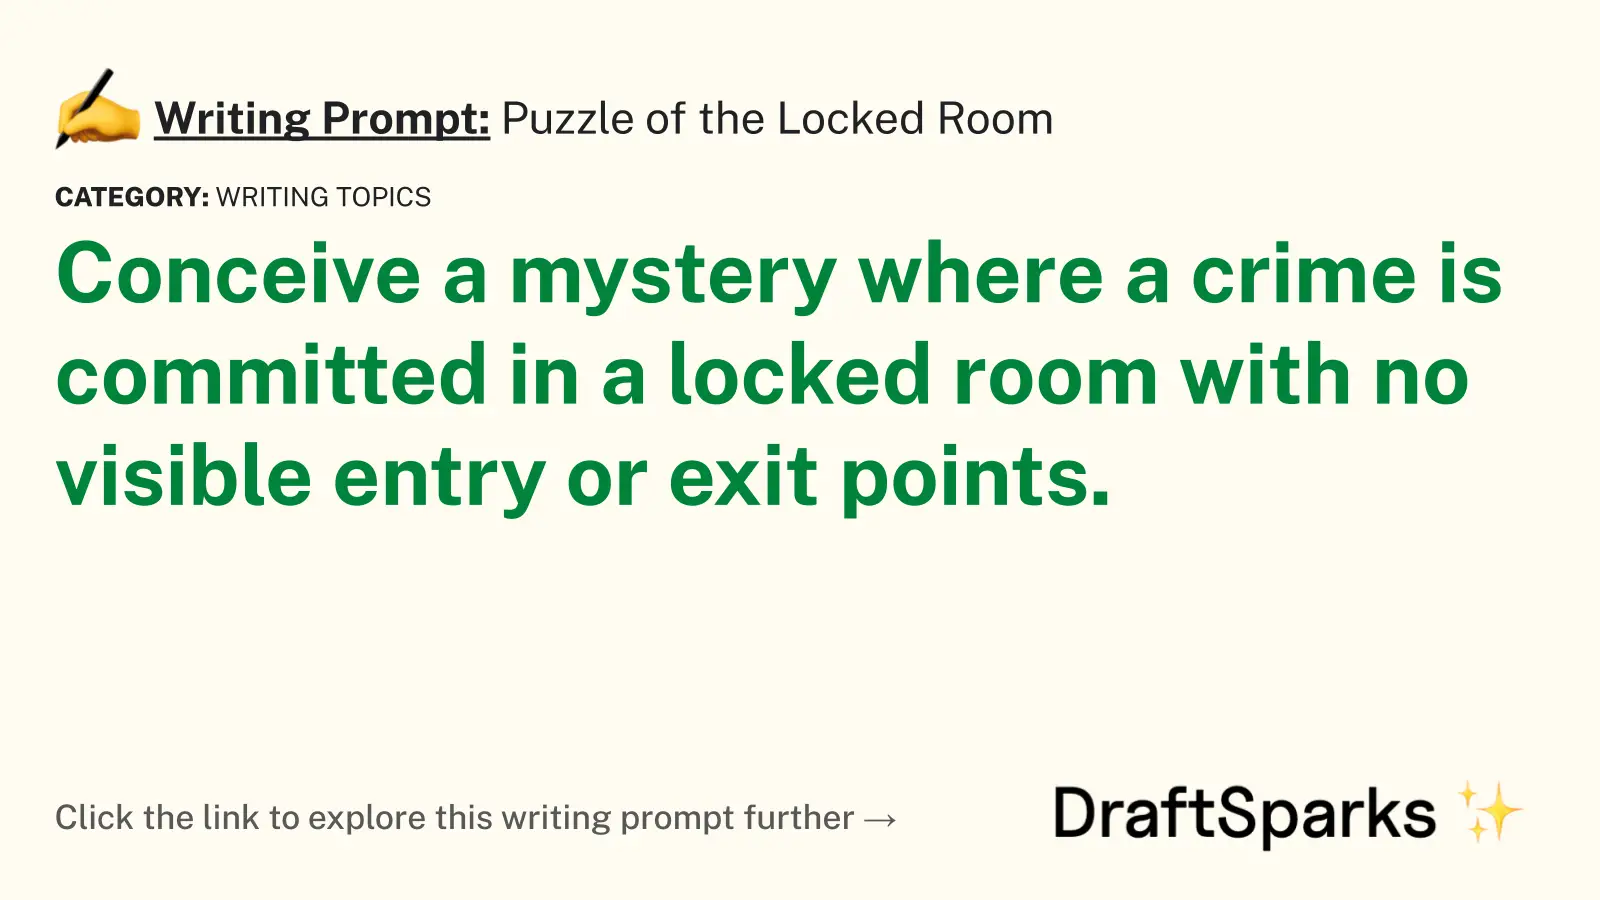 Puzzle of the Locked Room